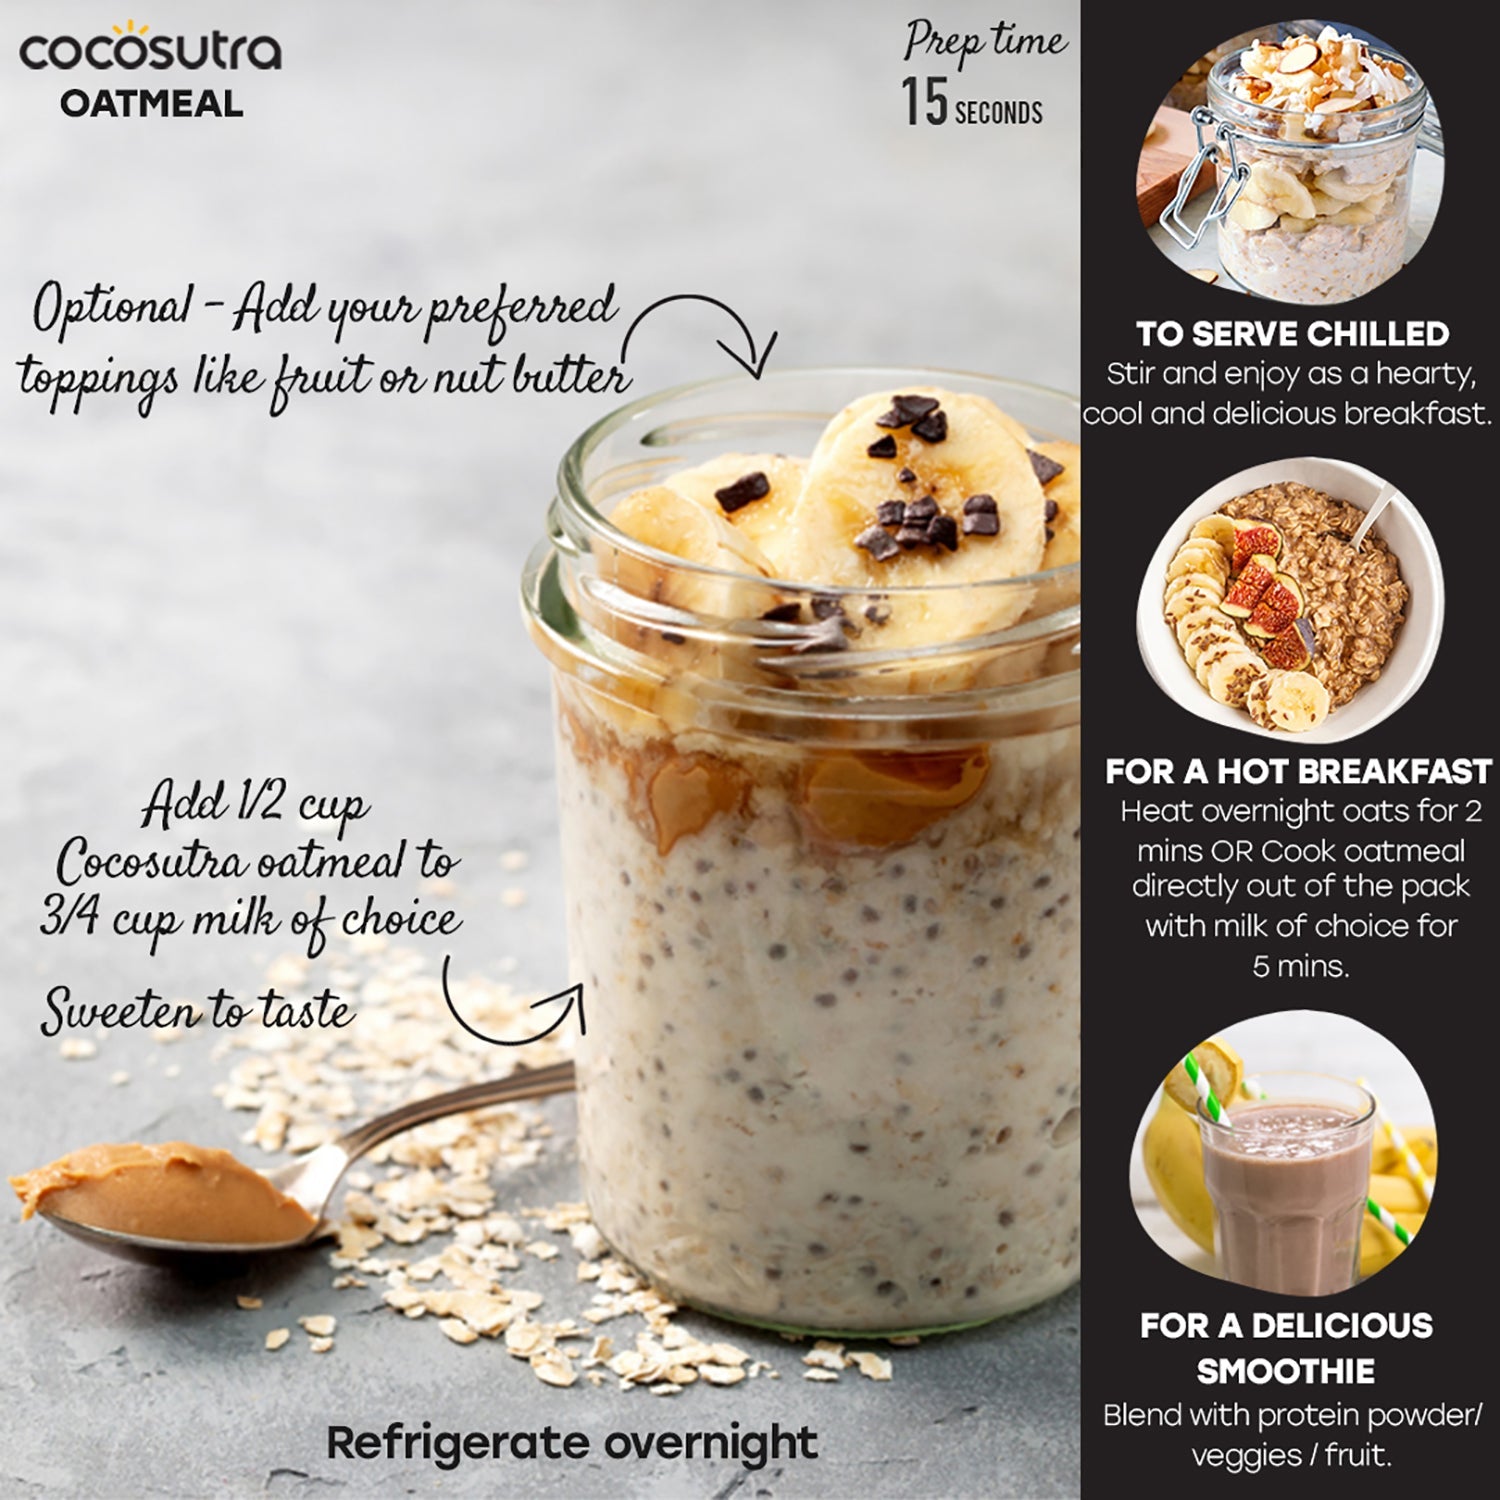 Cocosutra Oatmeal - Recipe Instructions